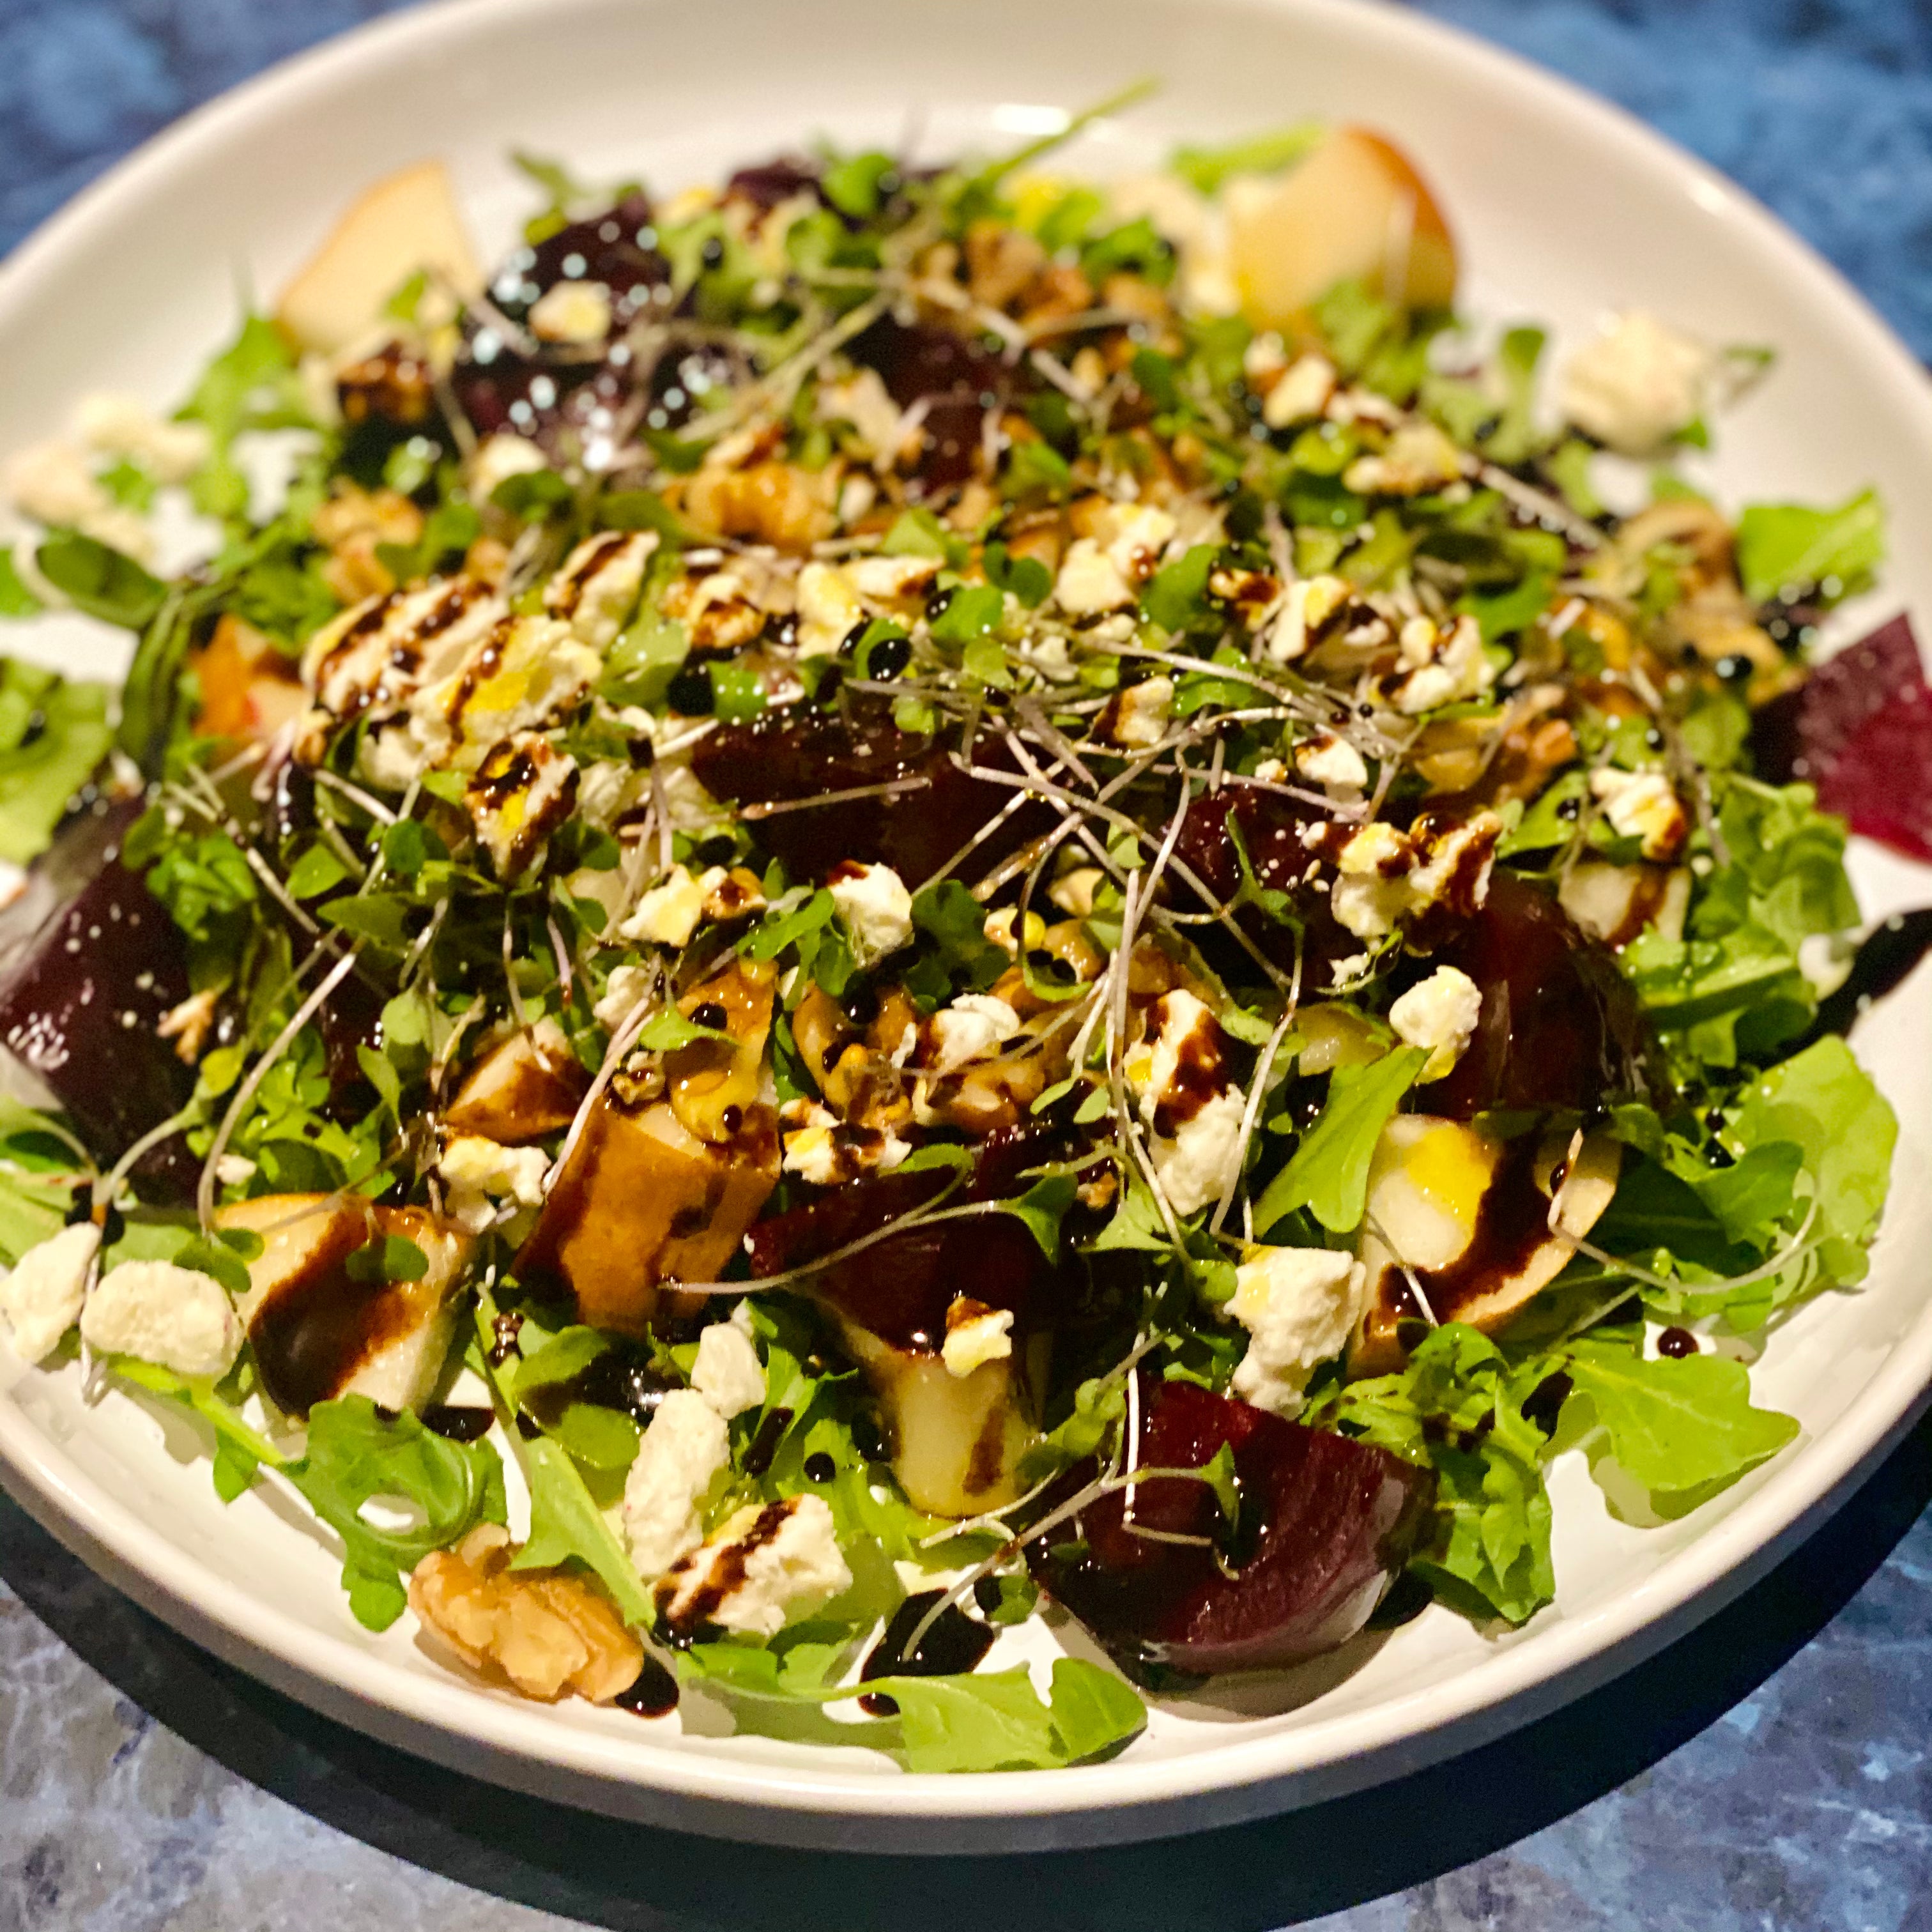 Roasted Beet & Pear Salad with Date Balsamic